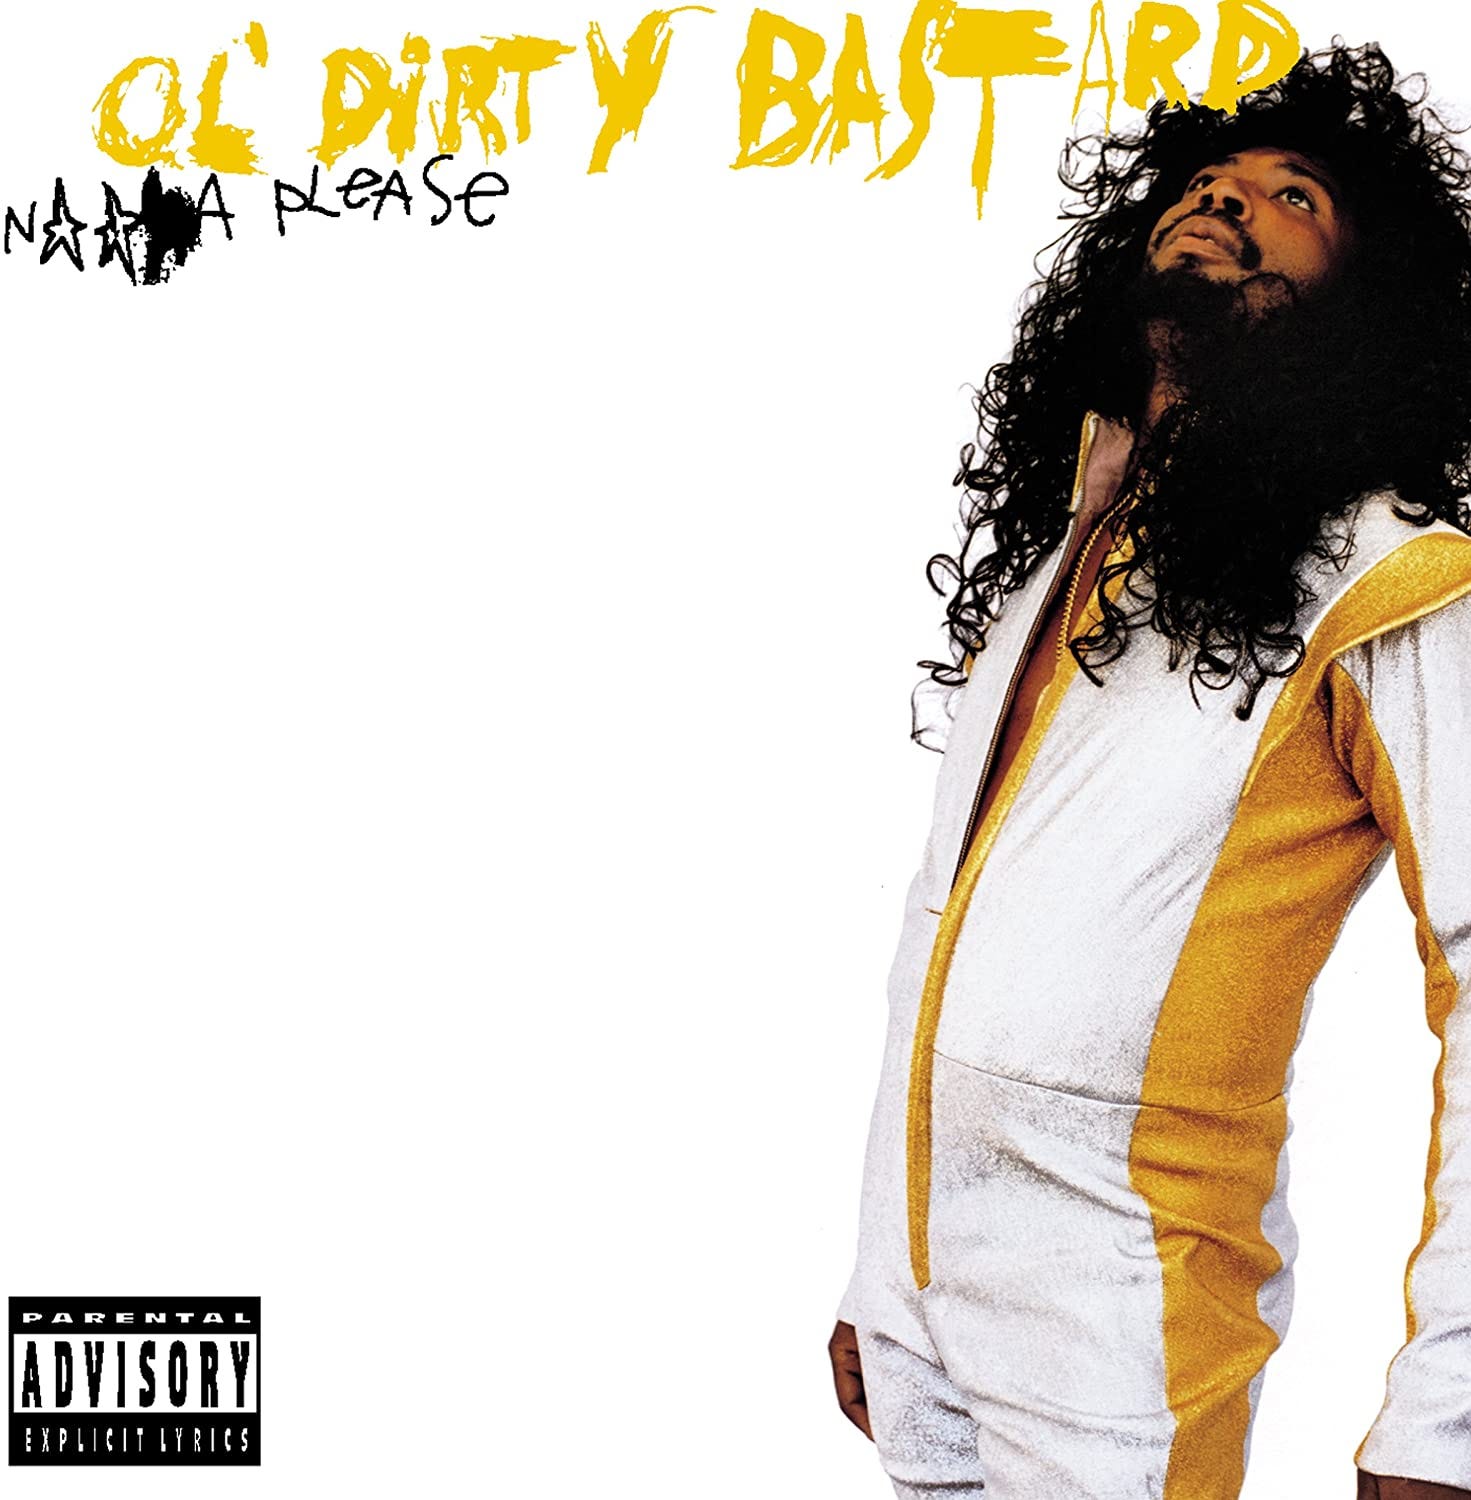 Thursday Review Ol Dirty Bastard N Please By Charles Blouingascon Amanmusthaveacode Medium